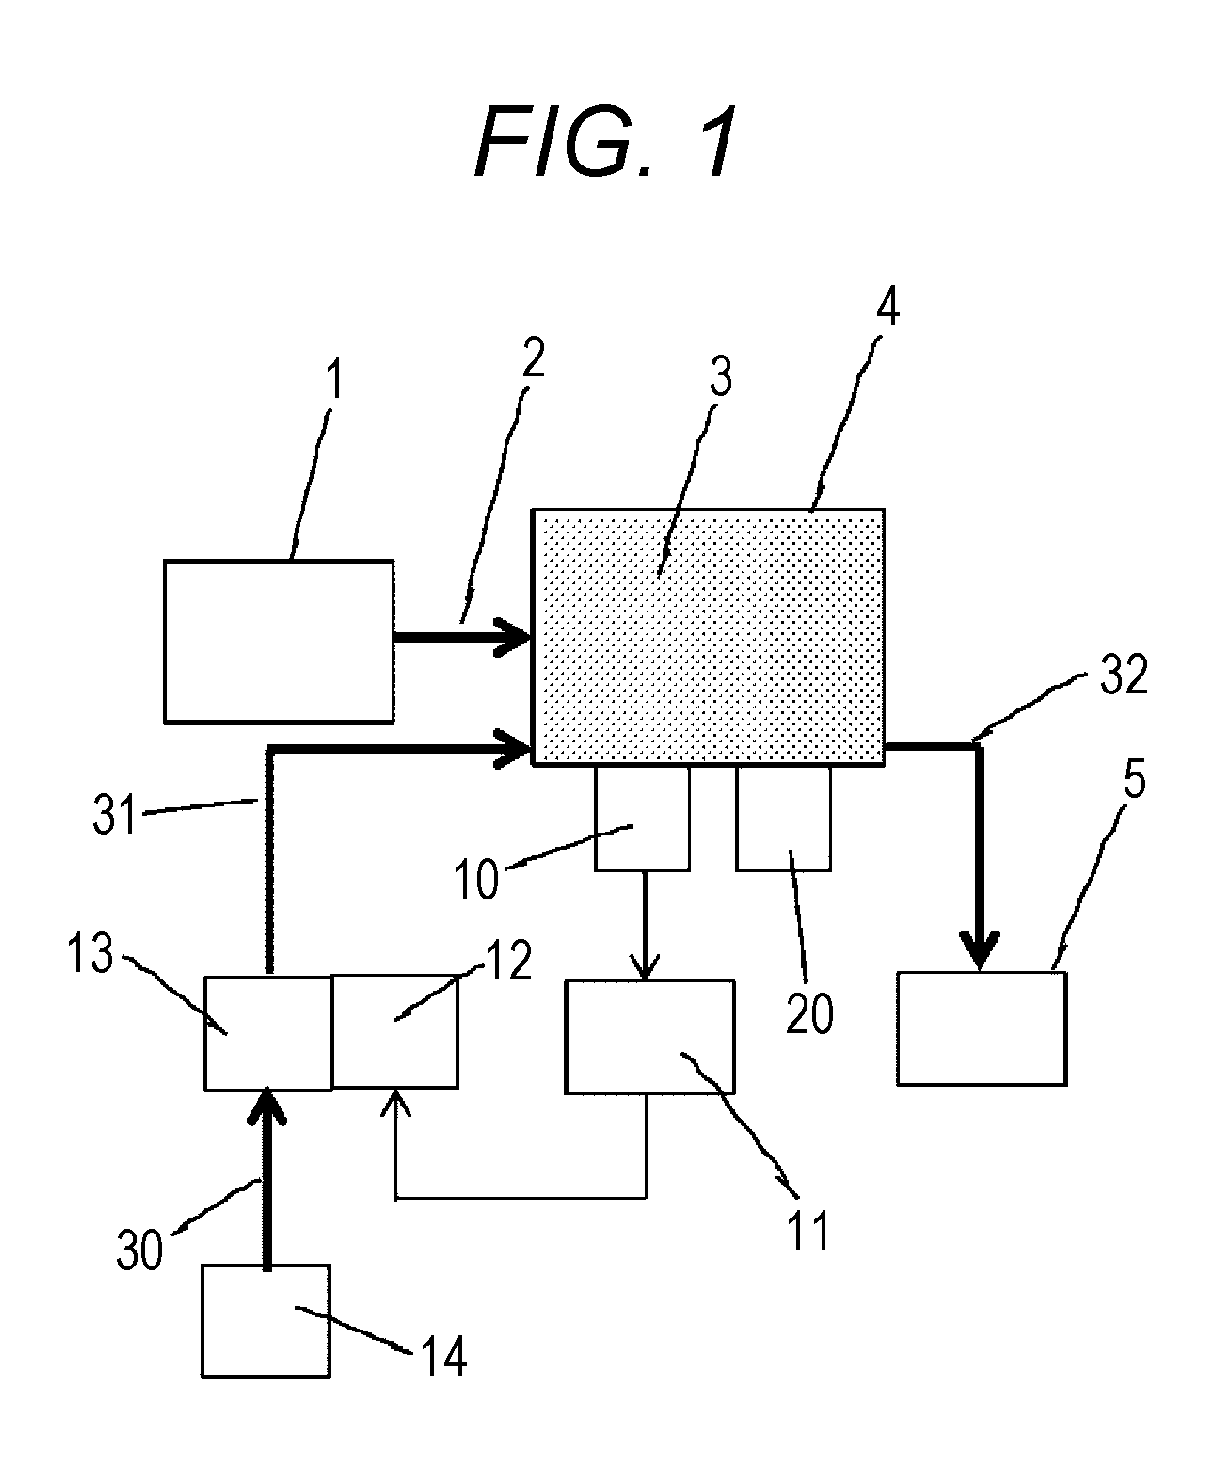 Method and apparatus for producing radionuclide